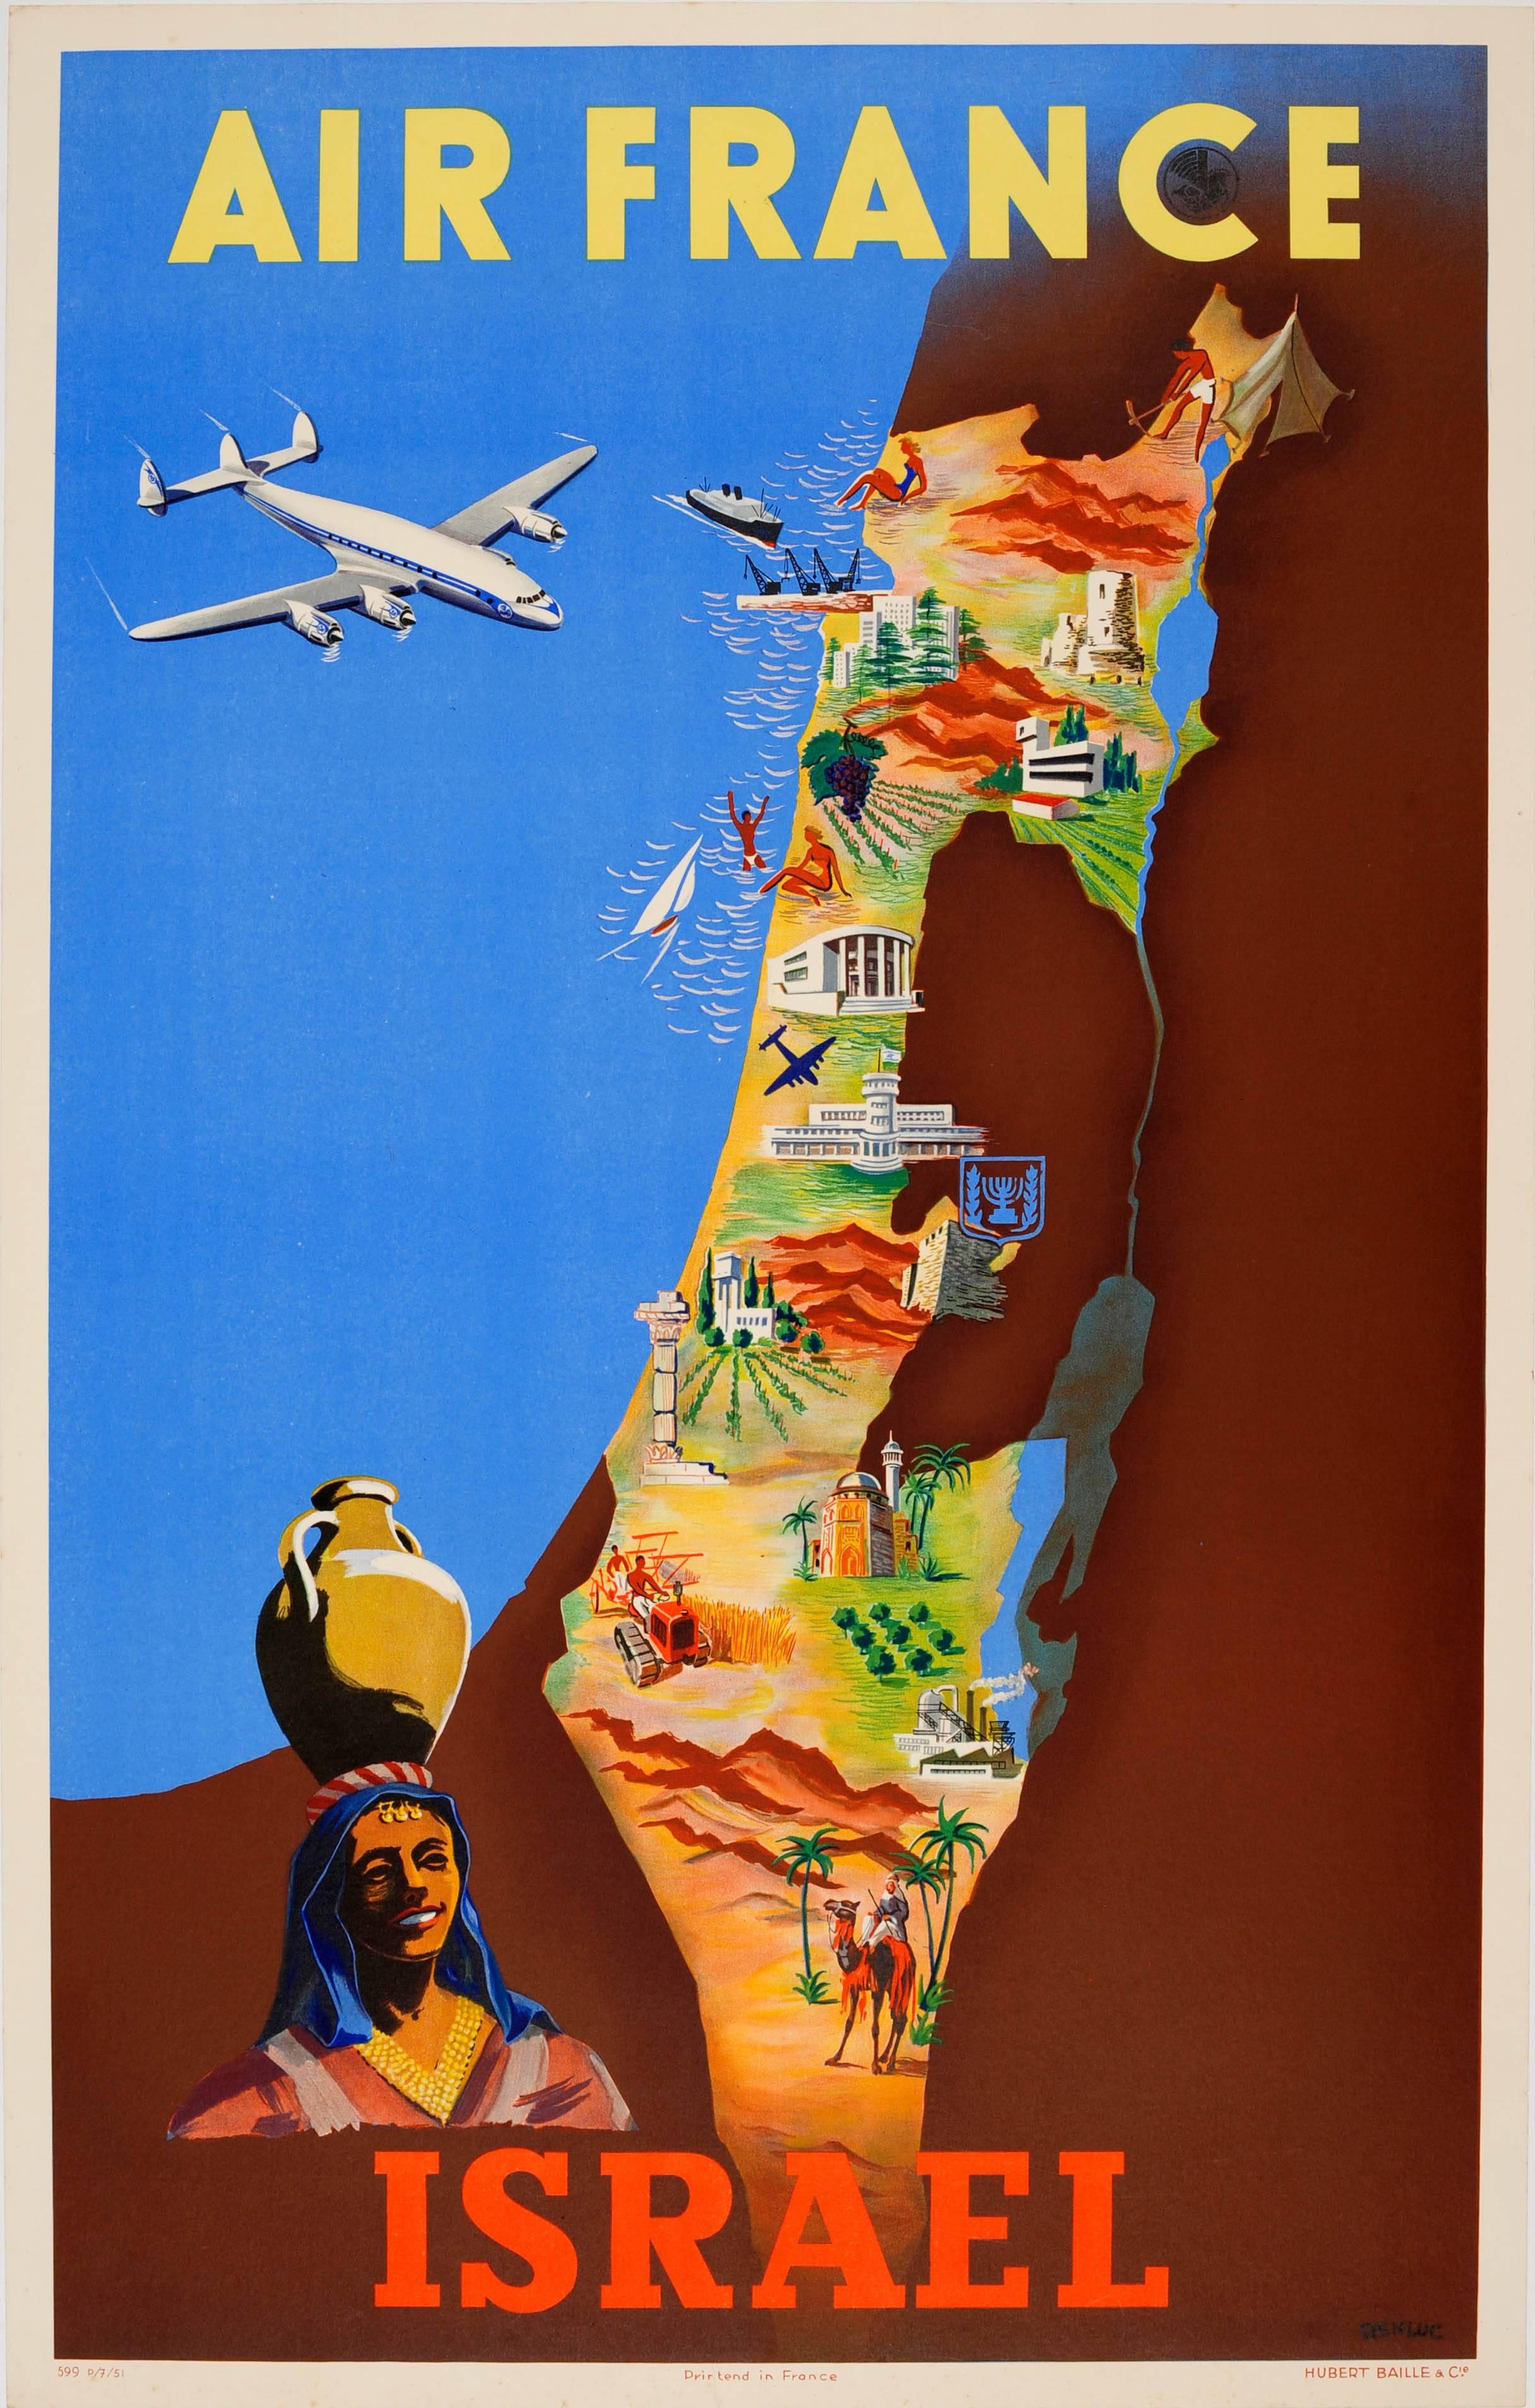 Original vintage Air France travel advertising poster for Israel featuring a plane flying over the Mediterranean Sea towards a colourful map of Israel in the Middle East with images depicting points of interest, mountains, factories, historical